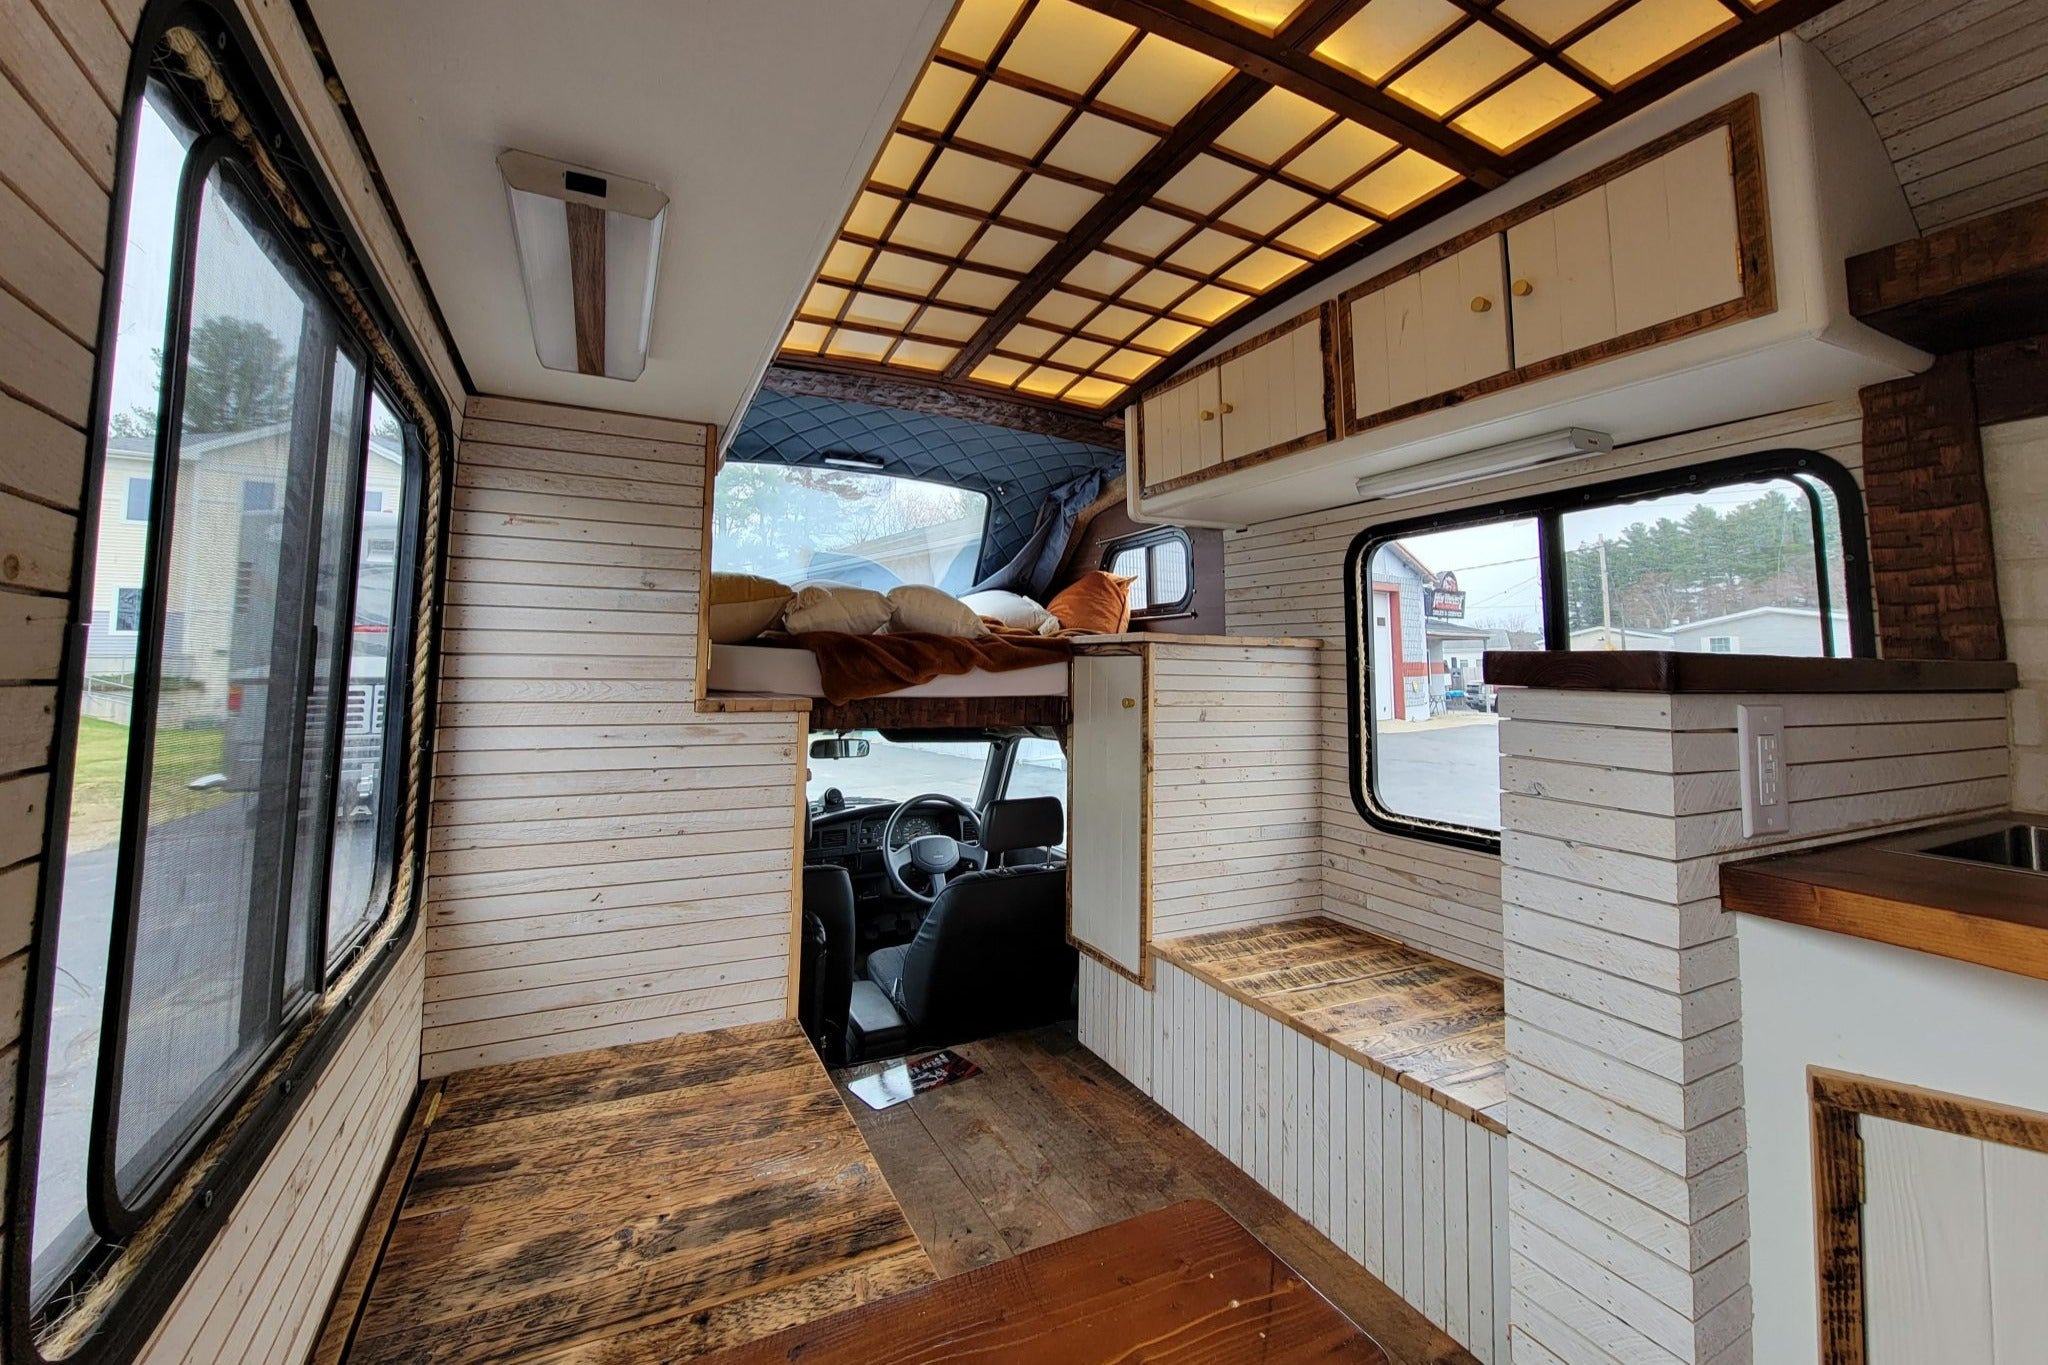 This Might Be the Nicest Toyota-Based Camper on Earth